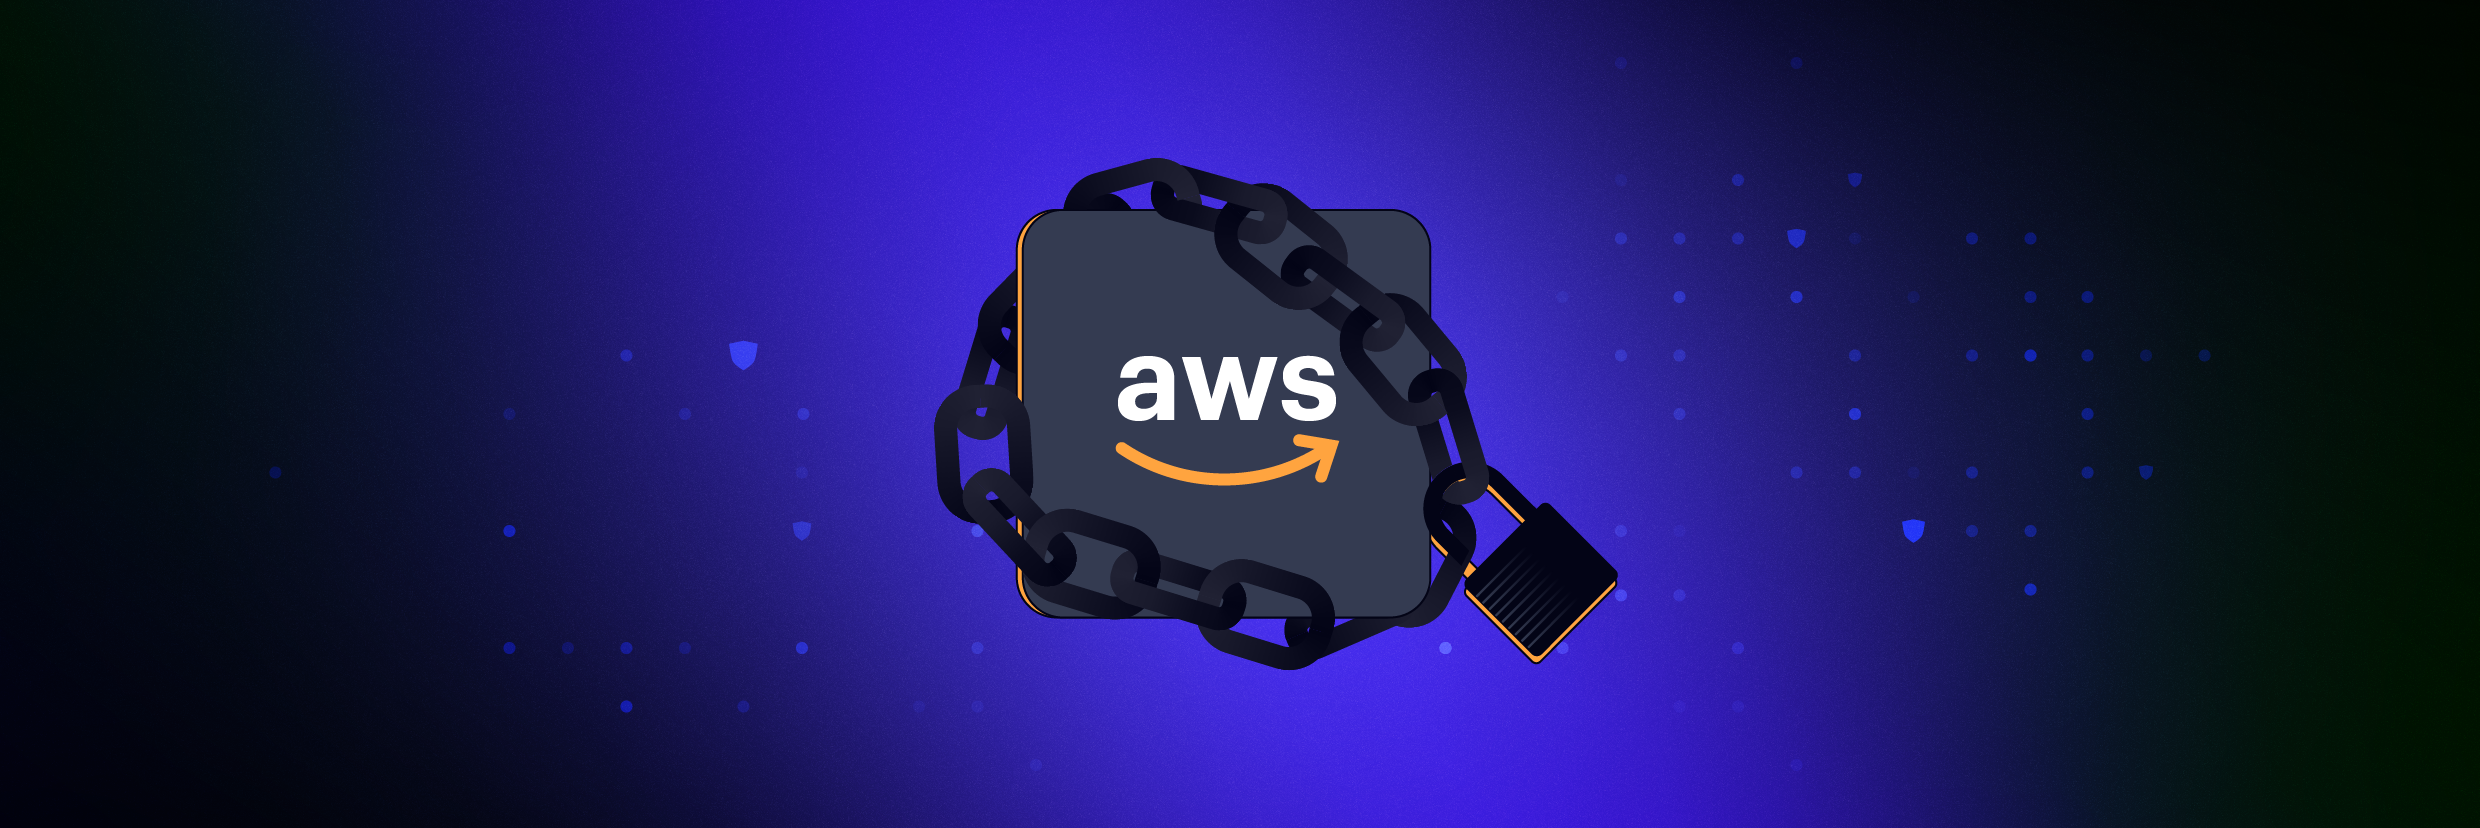 AWS Security Best Practices for a New Account - Varonis